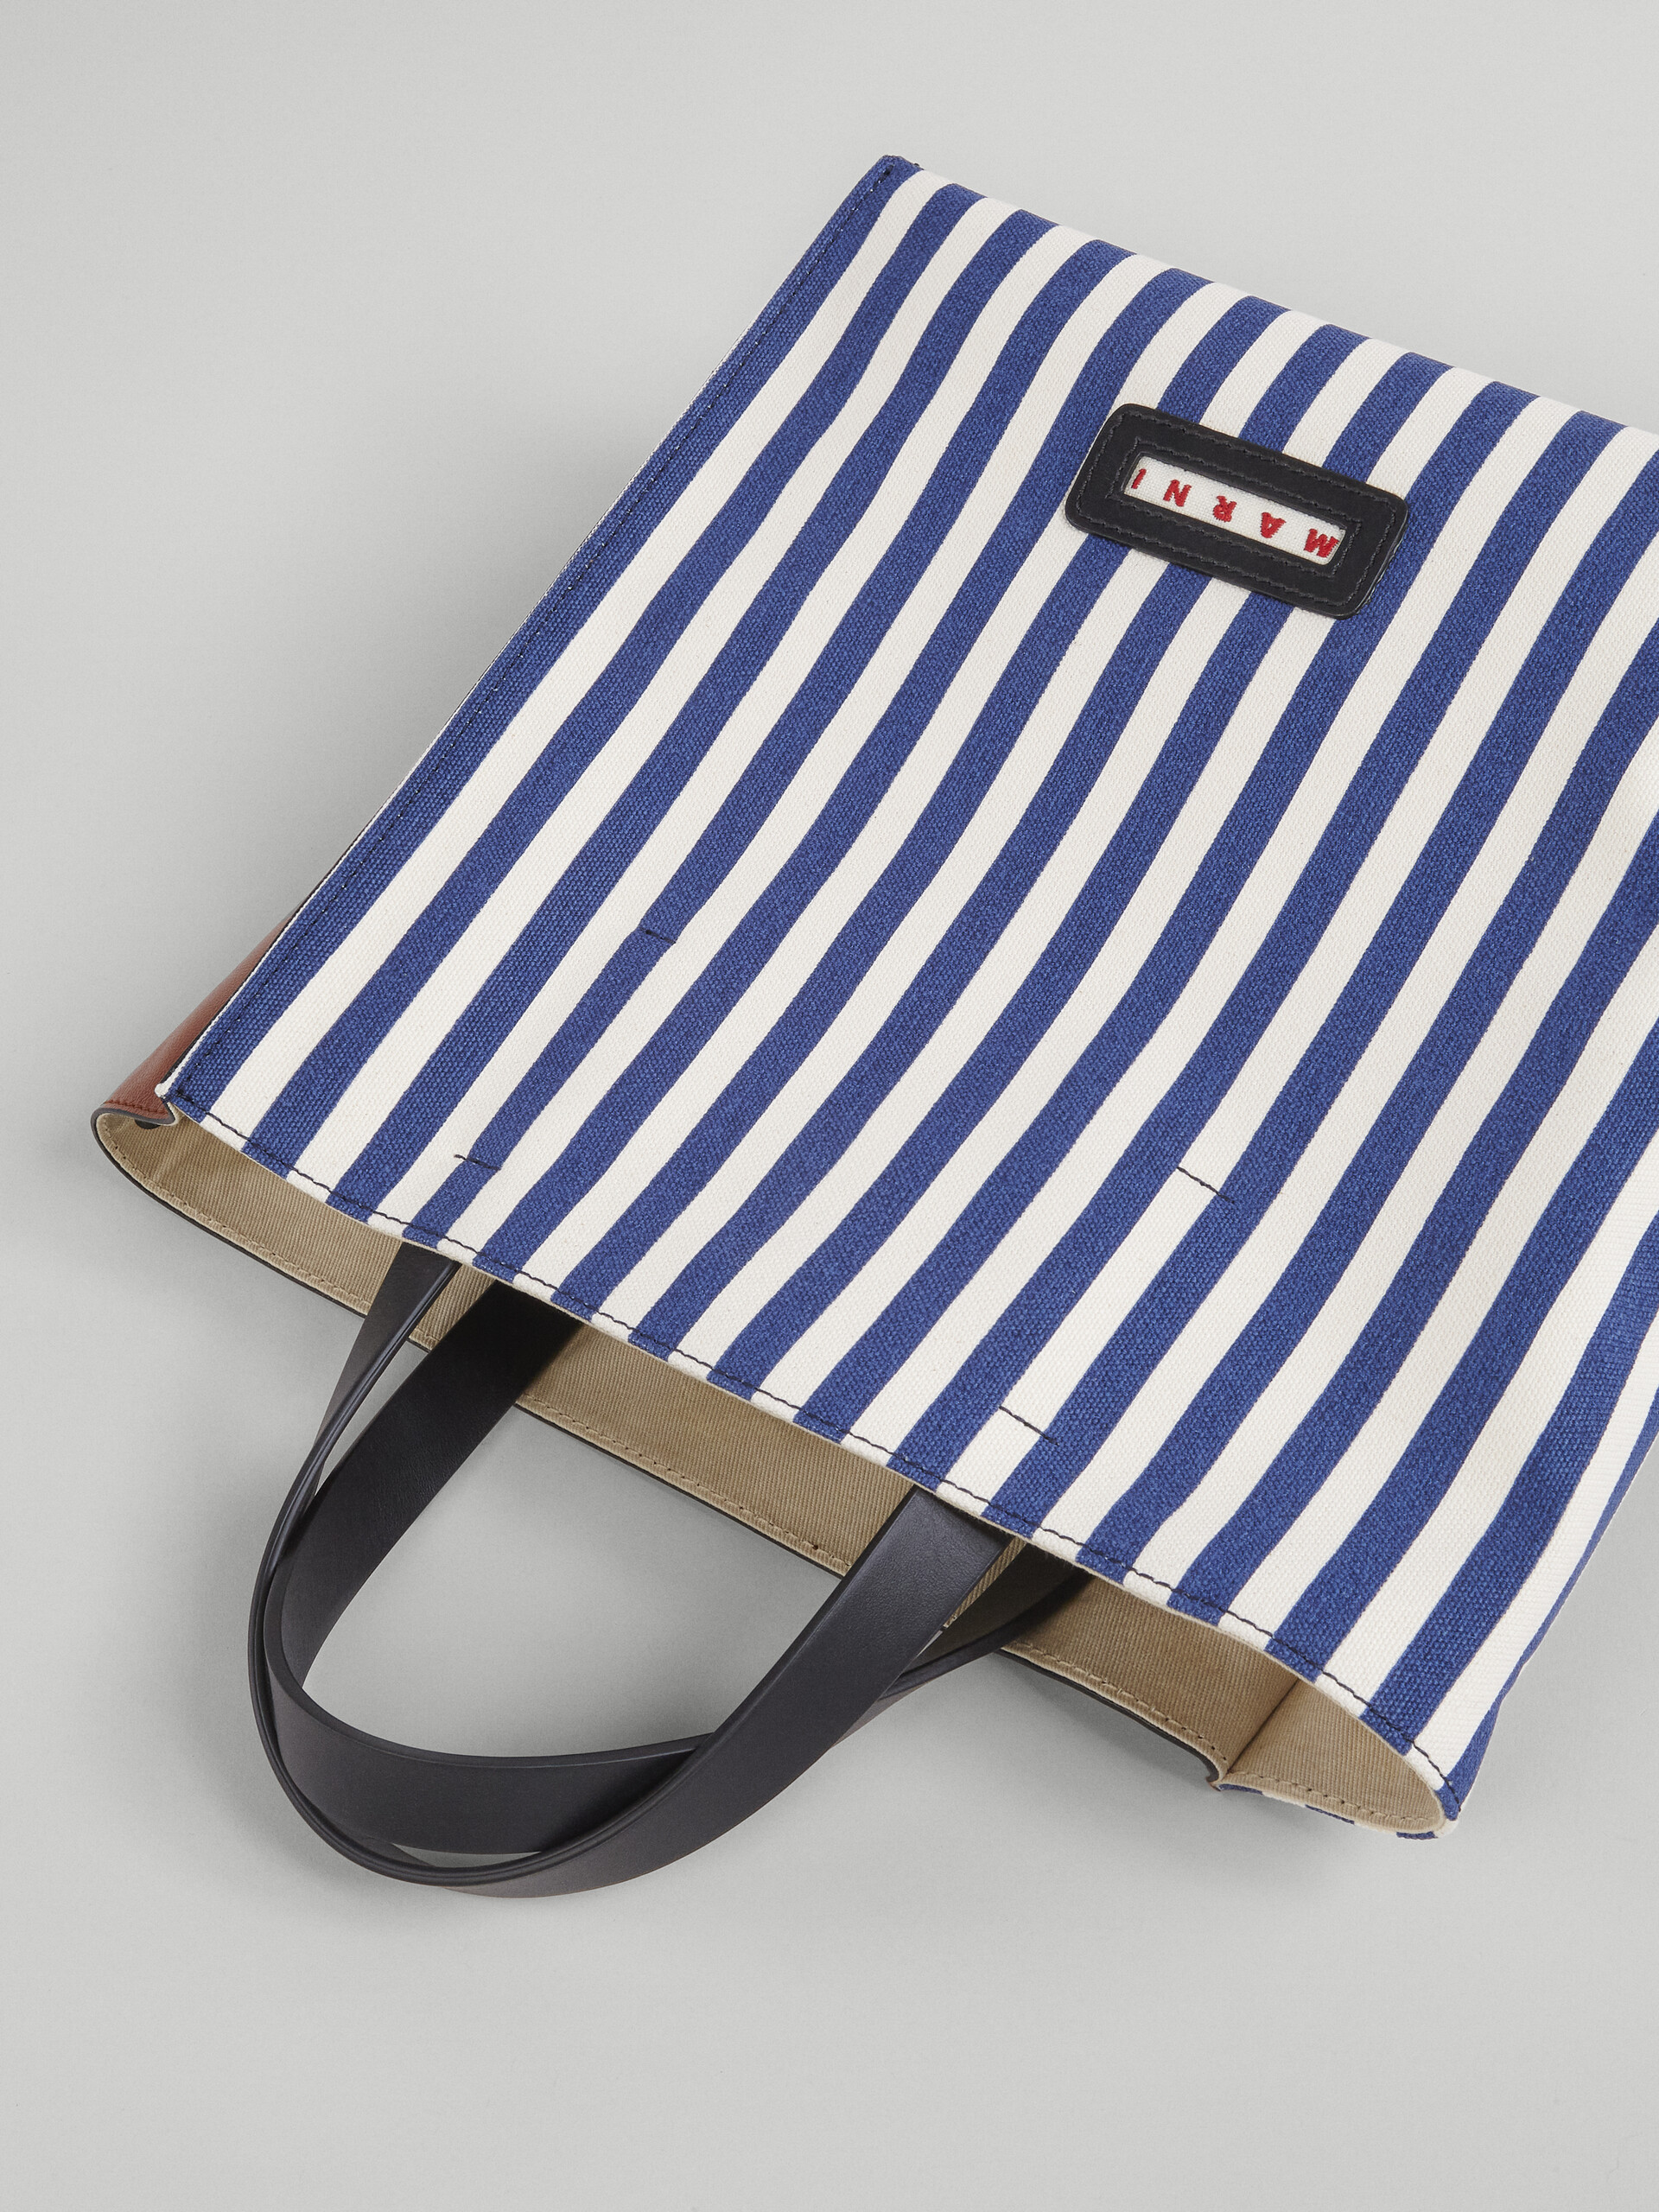 MUSEO SOFT small bag in blue striped canvas - Shopping Bags - Image 3